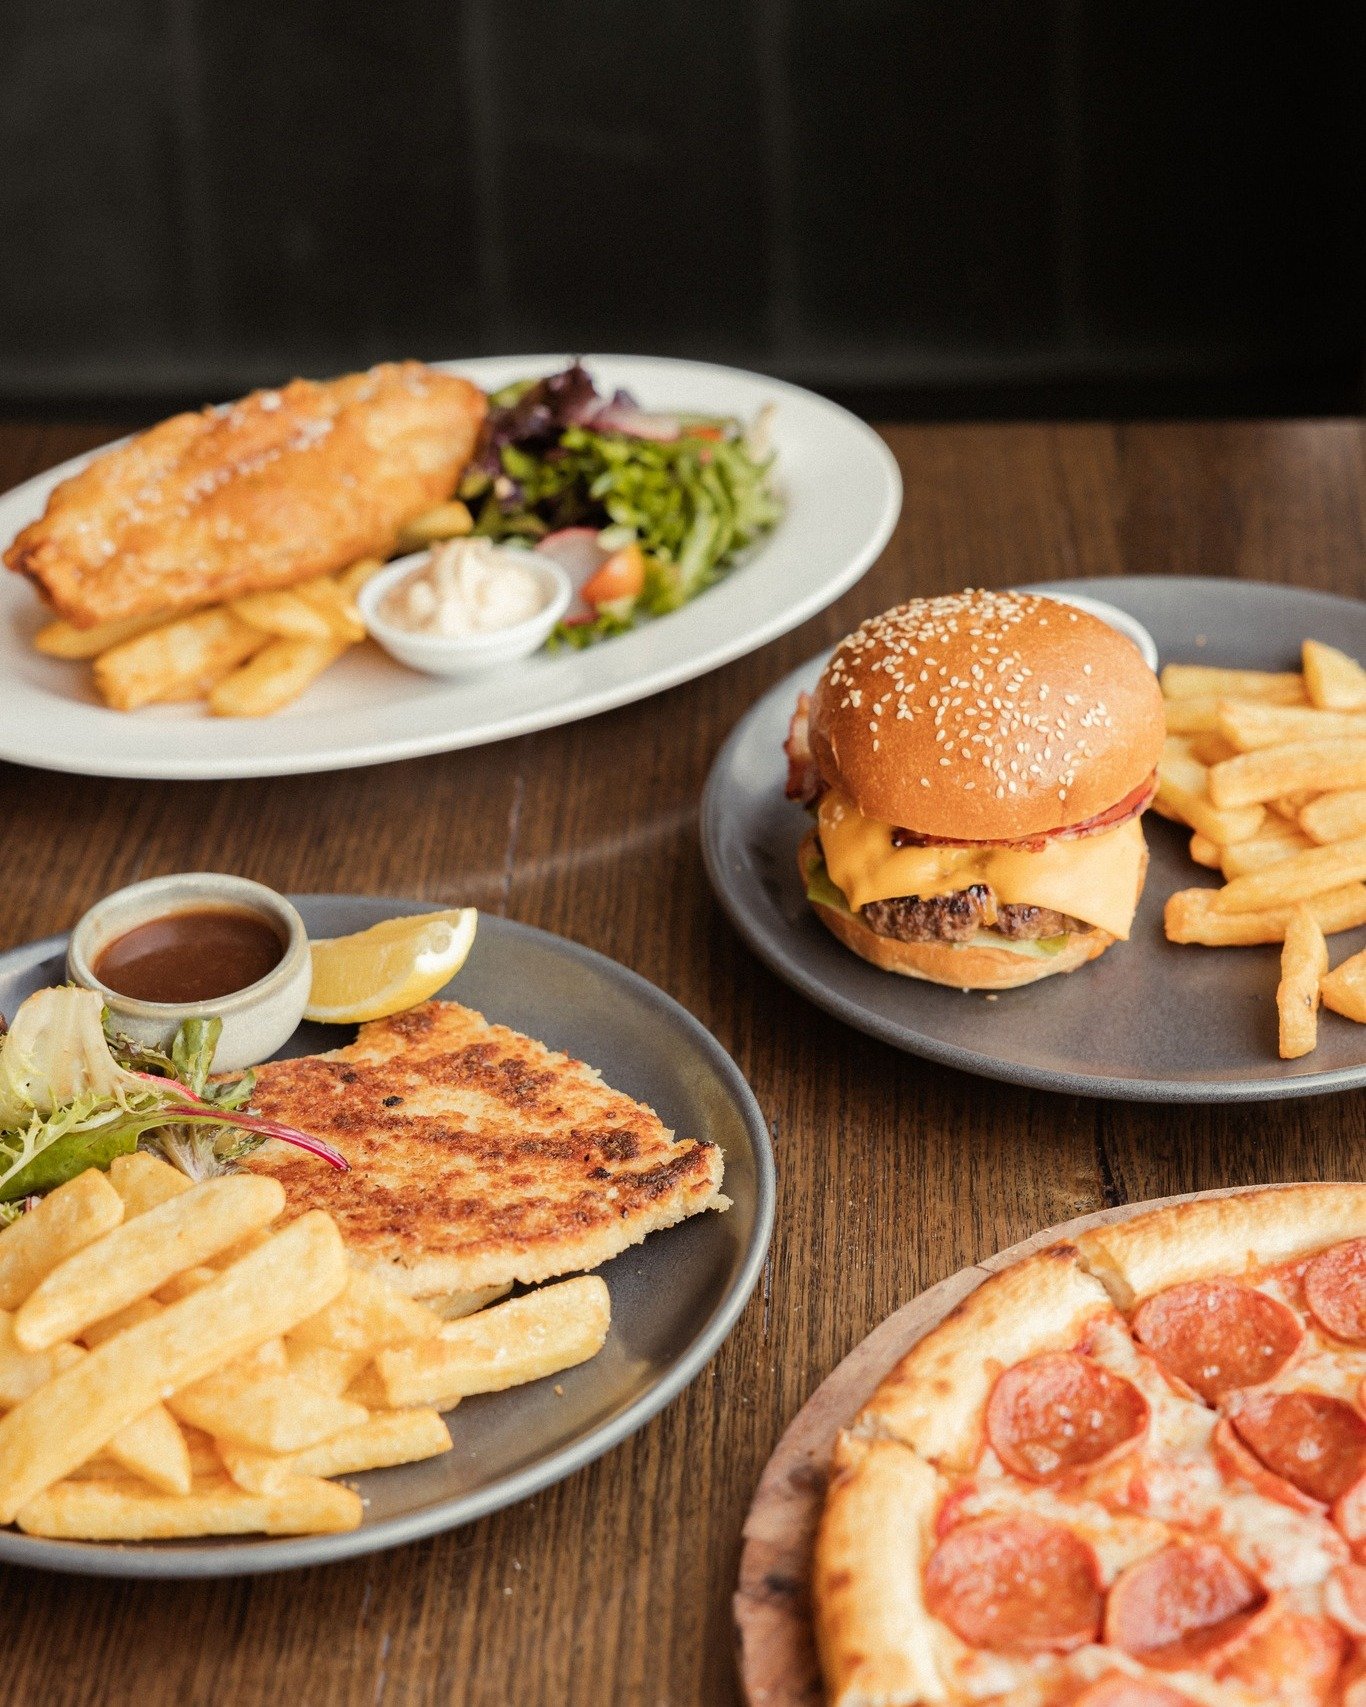 Our $19 Express Lunch is available from Monday to Friday. Don't miss out on this unbeatable deal &ndash; book now and satisfy your cravings with us! 🍽️✨

#thecamden #special #specialoffer #whatsonmelbourne #whatson #foodlover #instagood #foodpics #p